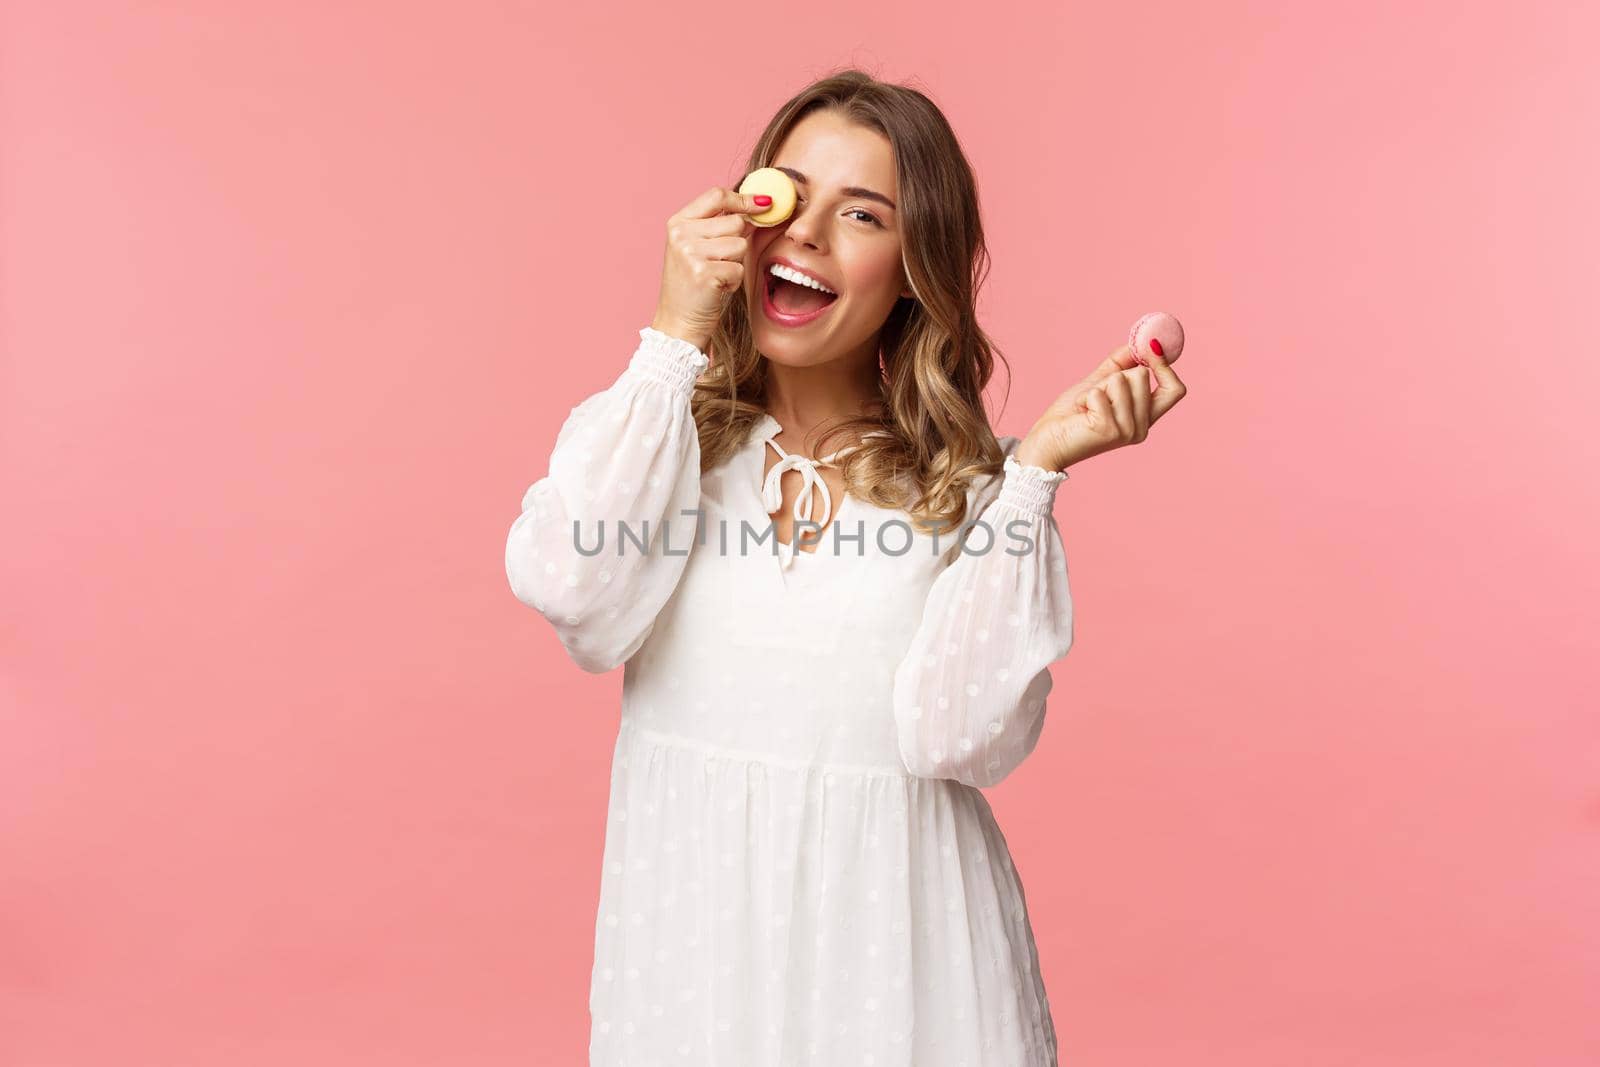 Holidays, spring and party concept. Portrait of carefree, tender and feminine girl in white dress, holding macarons dessert over eye, feeling cheerful, eating sweets, tasty desserts, pink background.